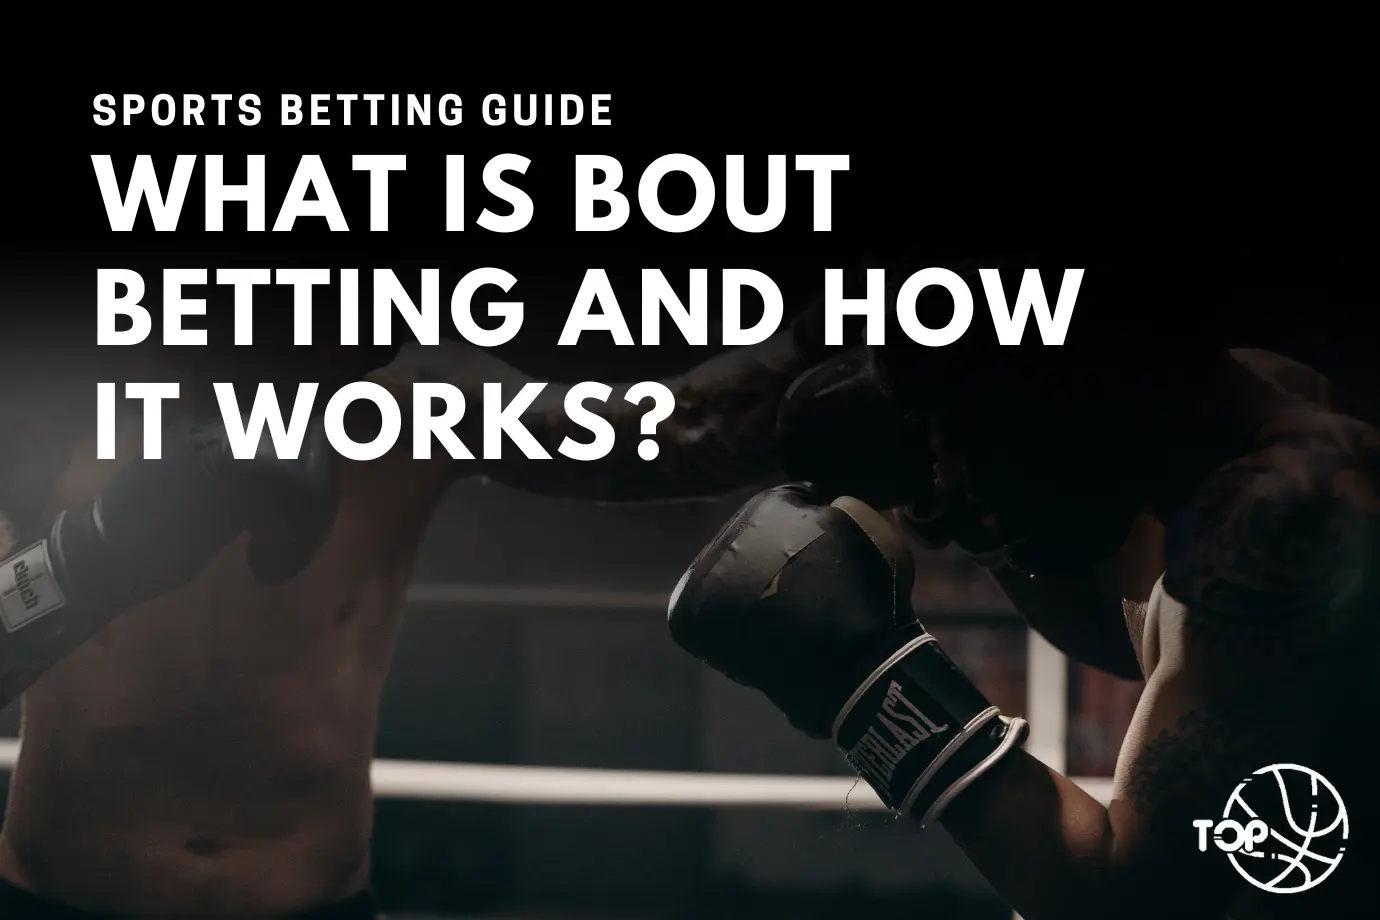 What is Bout Betting and How it Works?